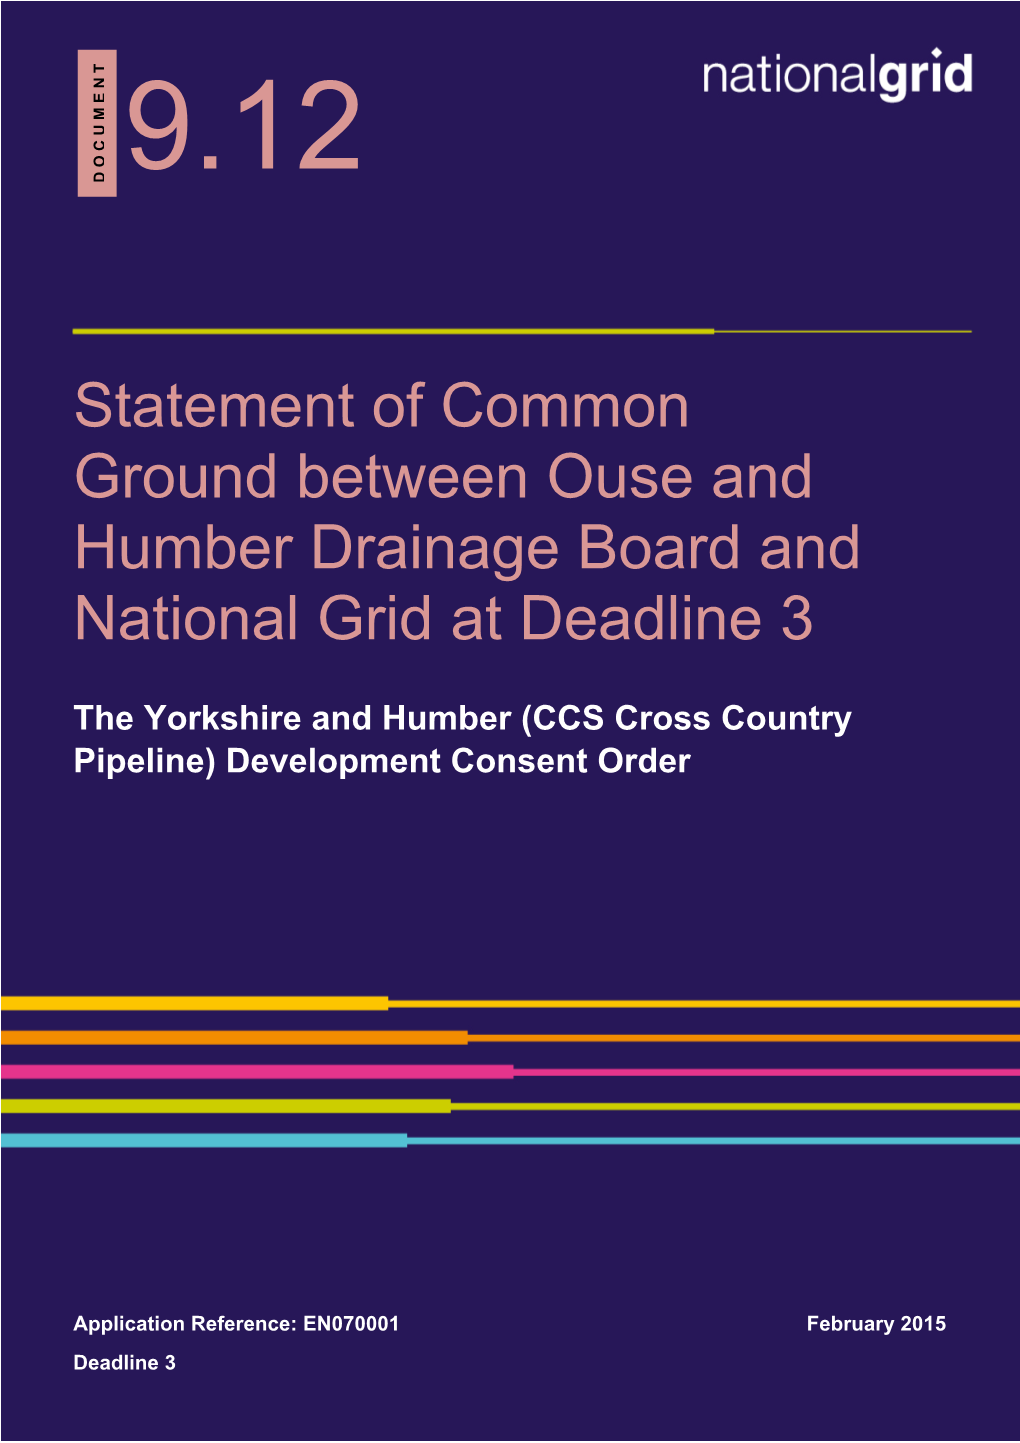 Statement of Common Ground Between Ouse and Humber Drainage Board and National Grid at Deadline 3